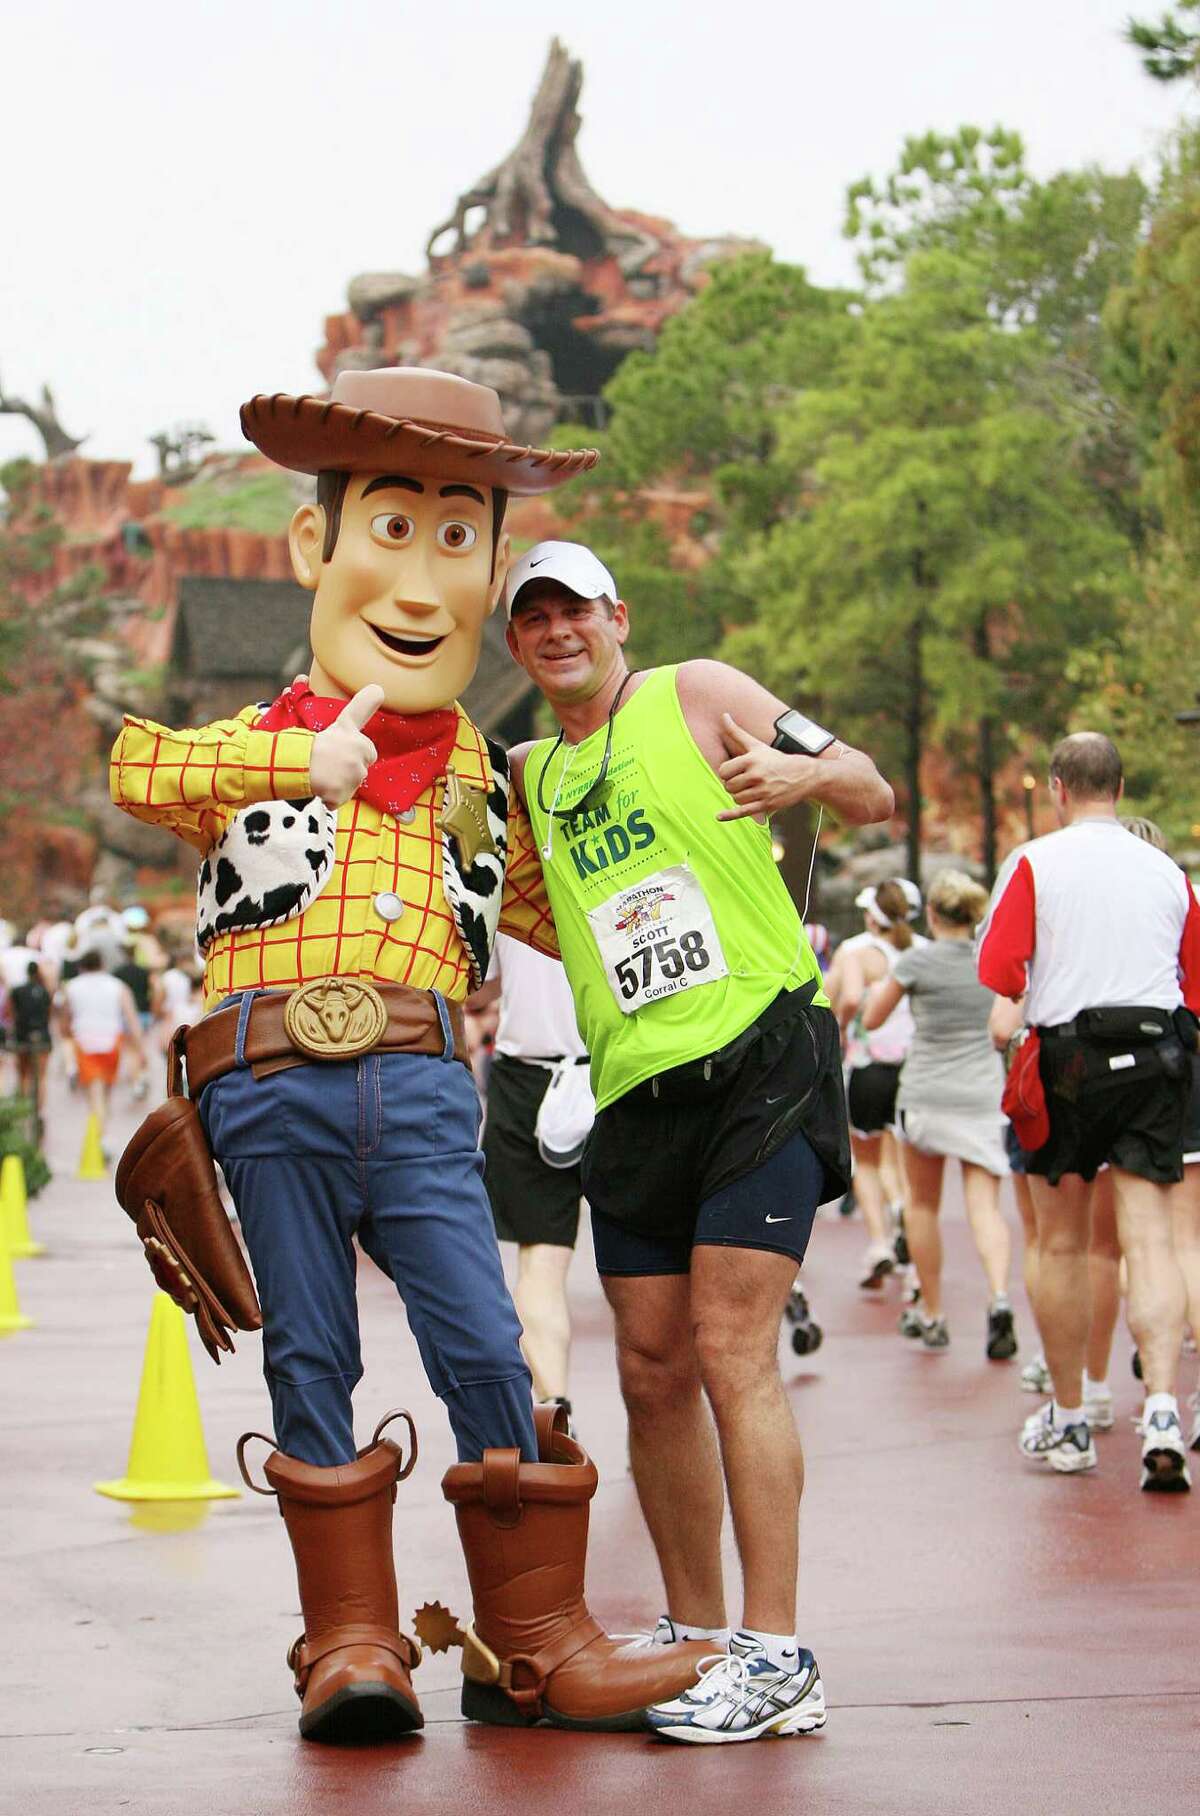 Athletes pose with characters (Woody from "Toy Story") and run through Frontierland in the Magic Kingdom in Lake Buena Vista, Fla. Jan.13, 2008, in the 15th Annual Walt Disney World Marathon. More than 18,000 registered for the race, an event record.